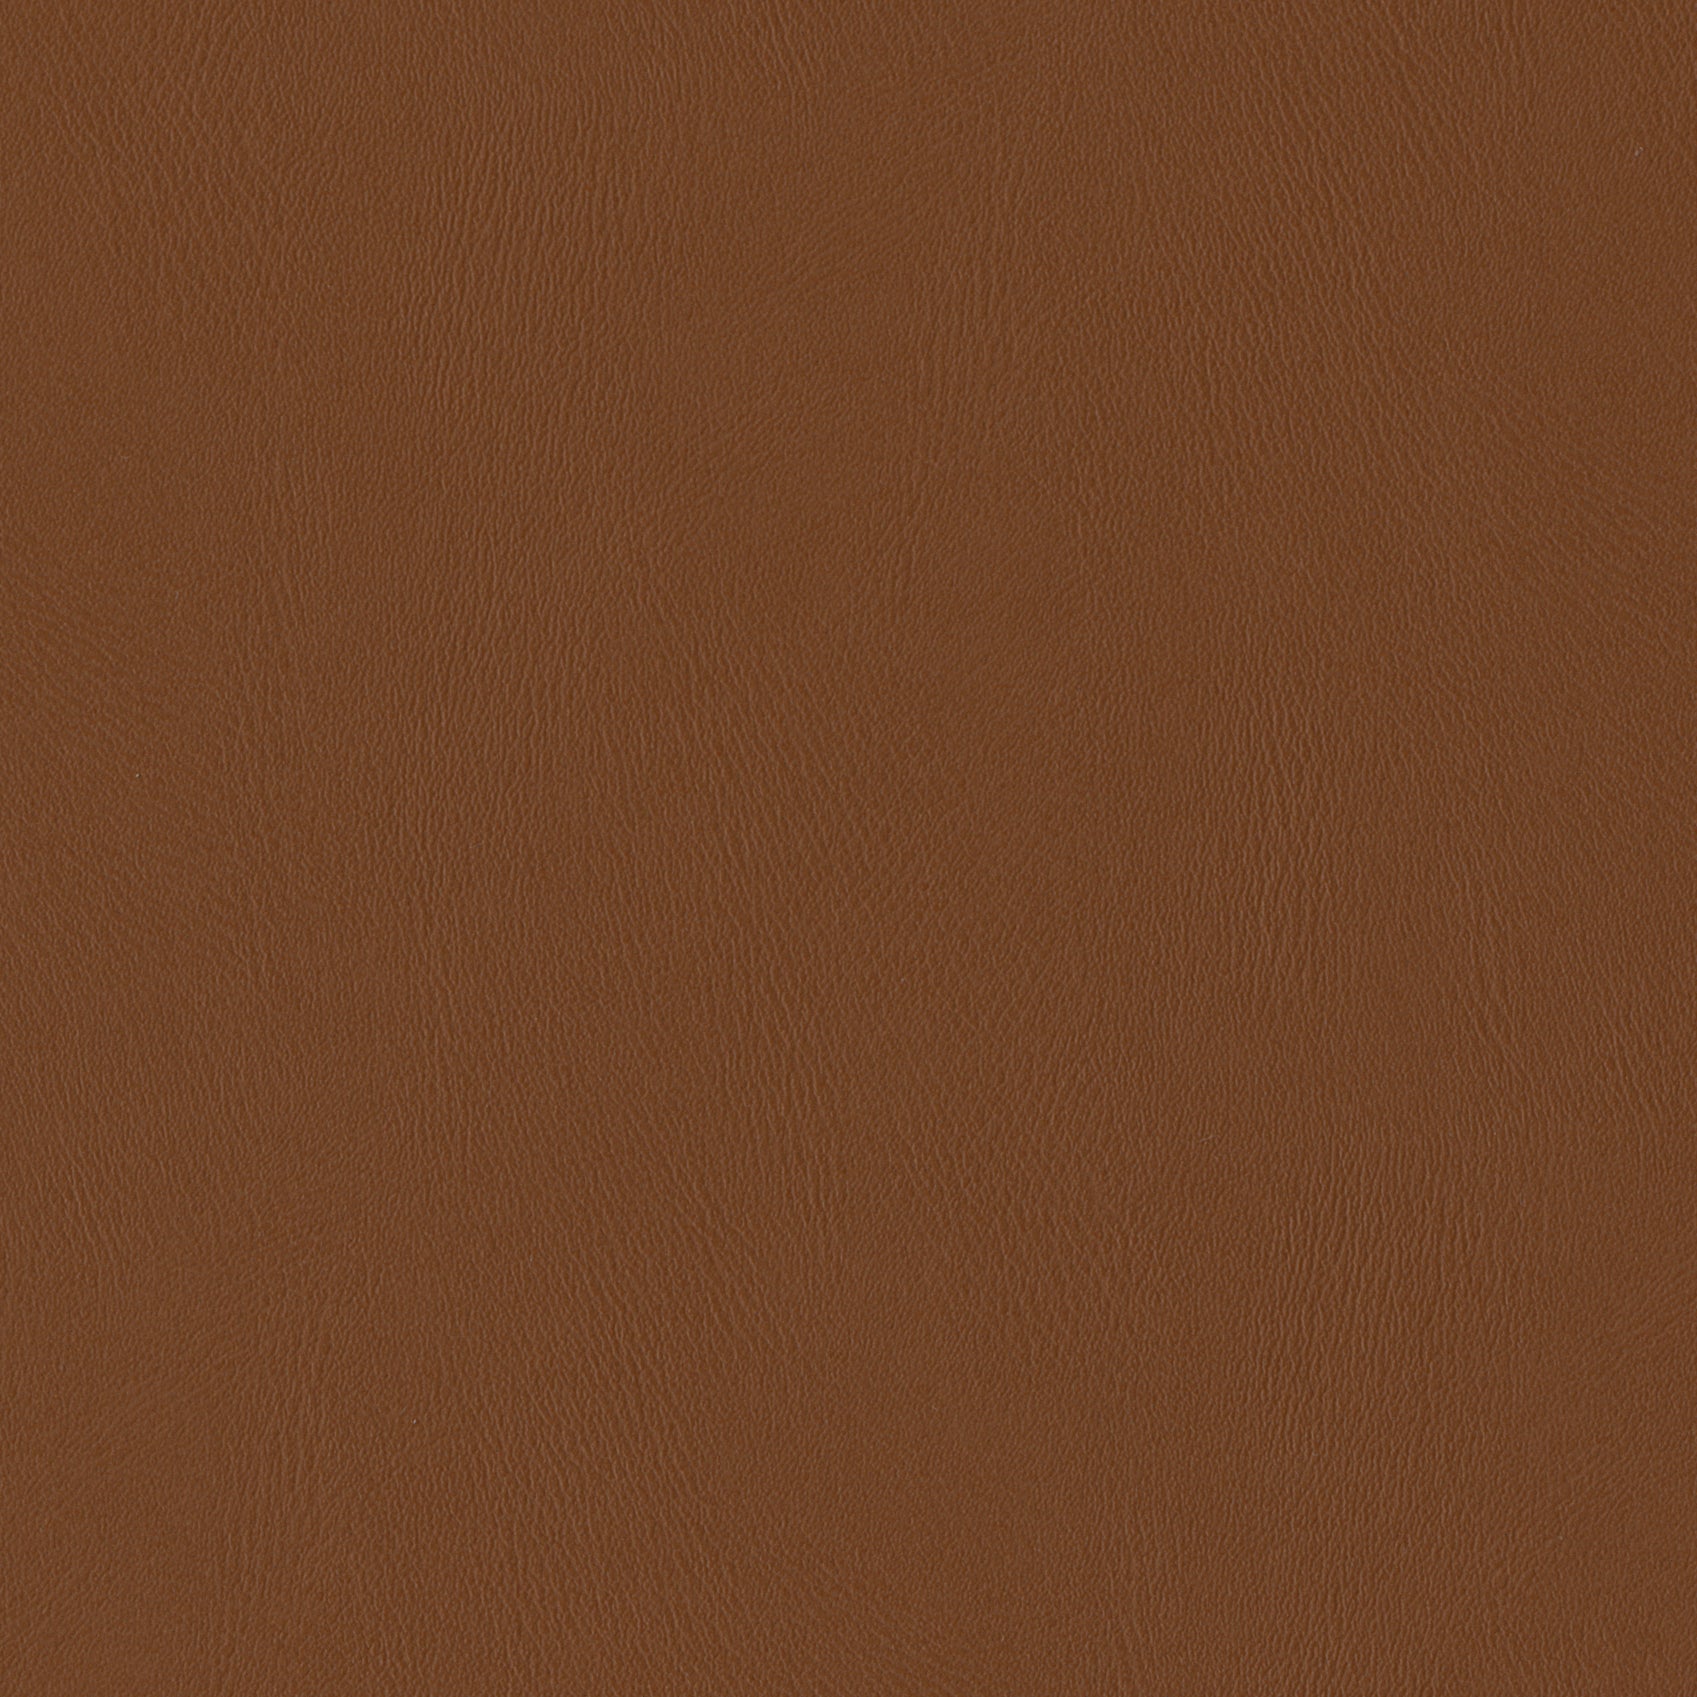       Andriali-Contract-Vinyl_Upholstery-Design-SoloFR5-Color-310GingerBread-Width-140cm